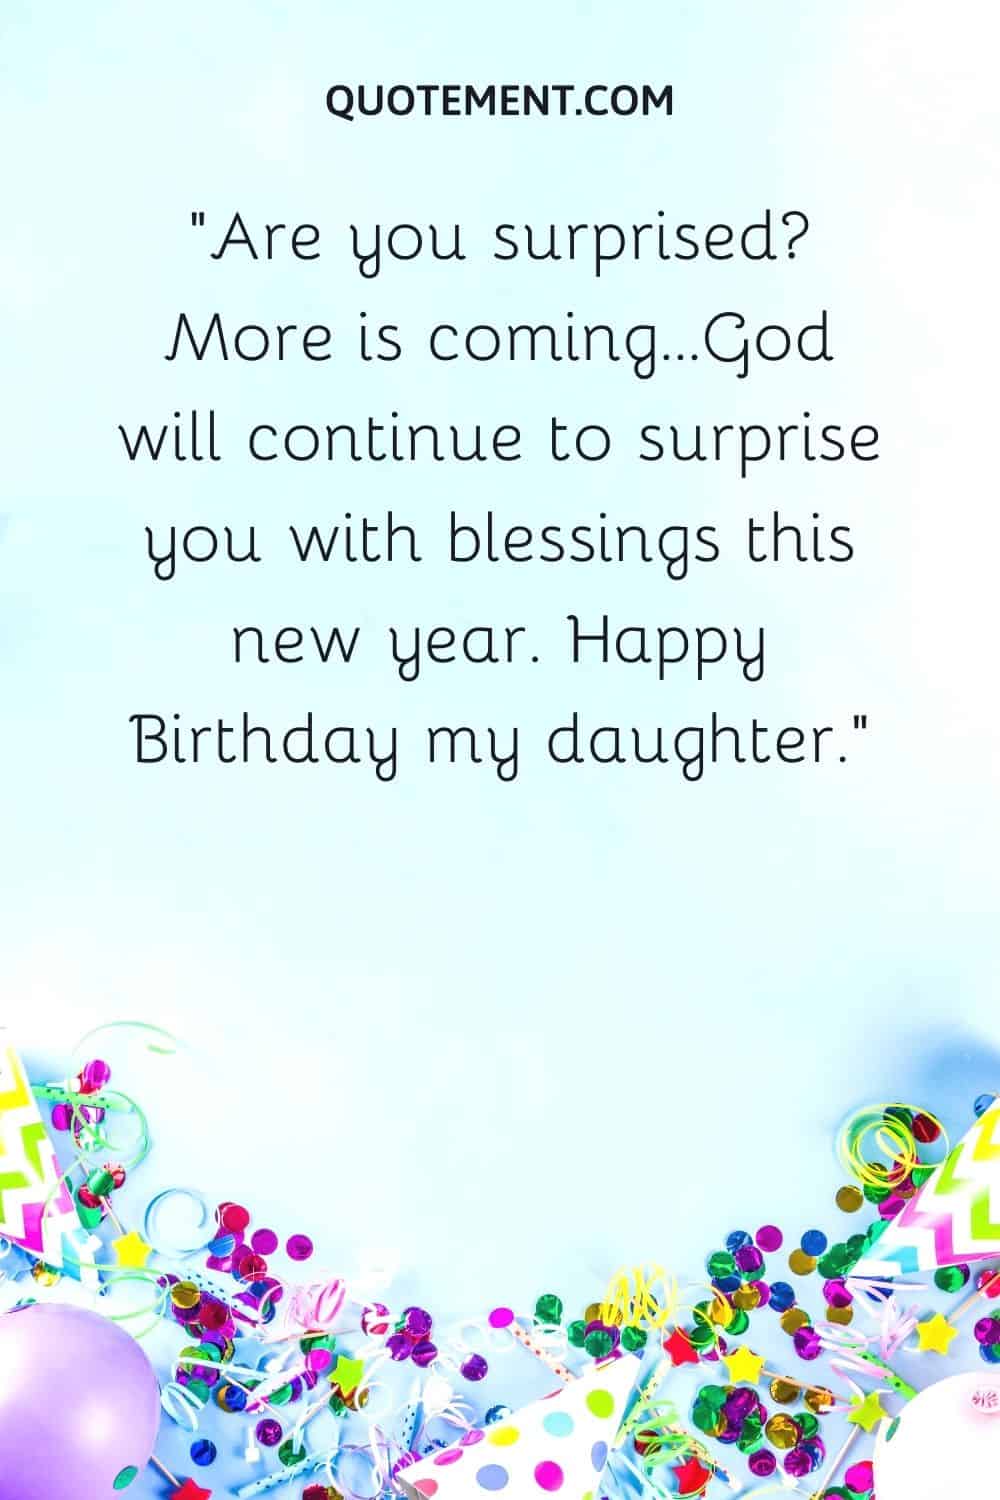 God will continue to surprise you with blessings this new year.